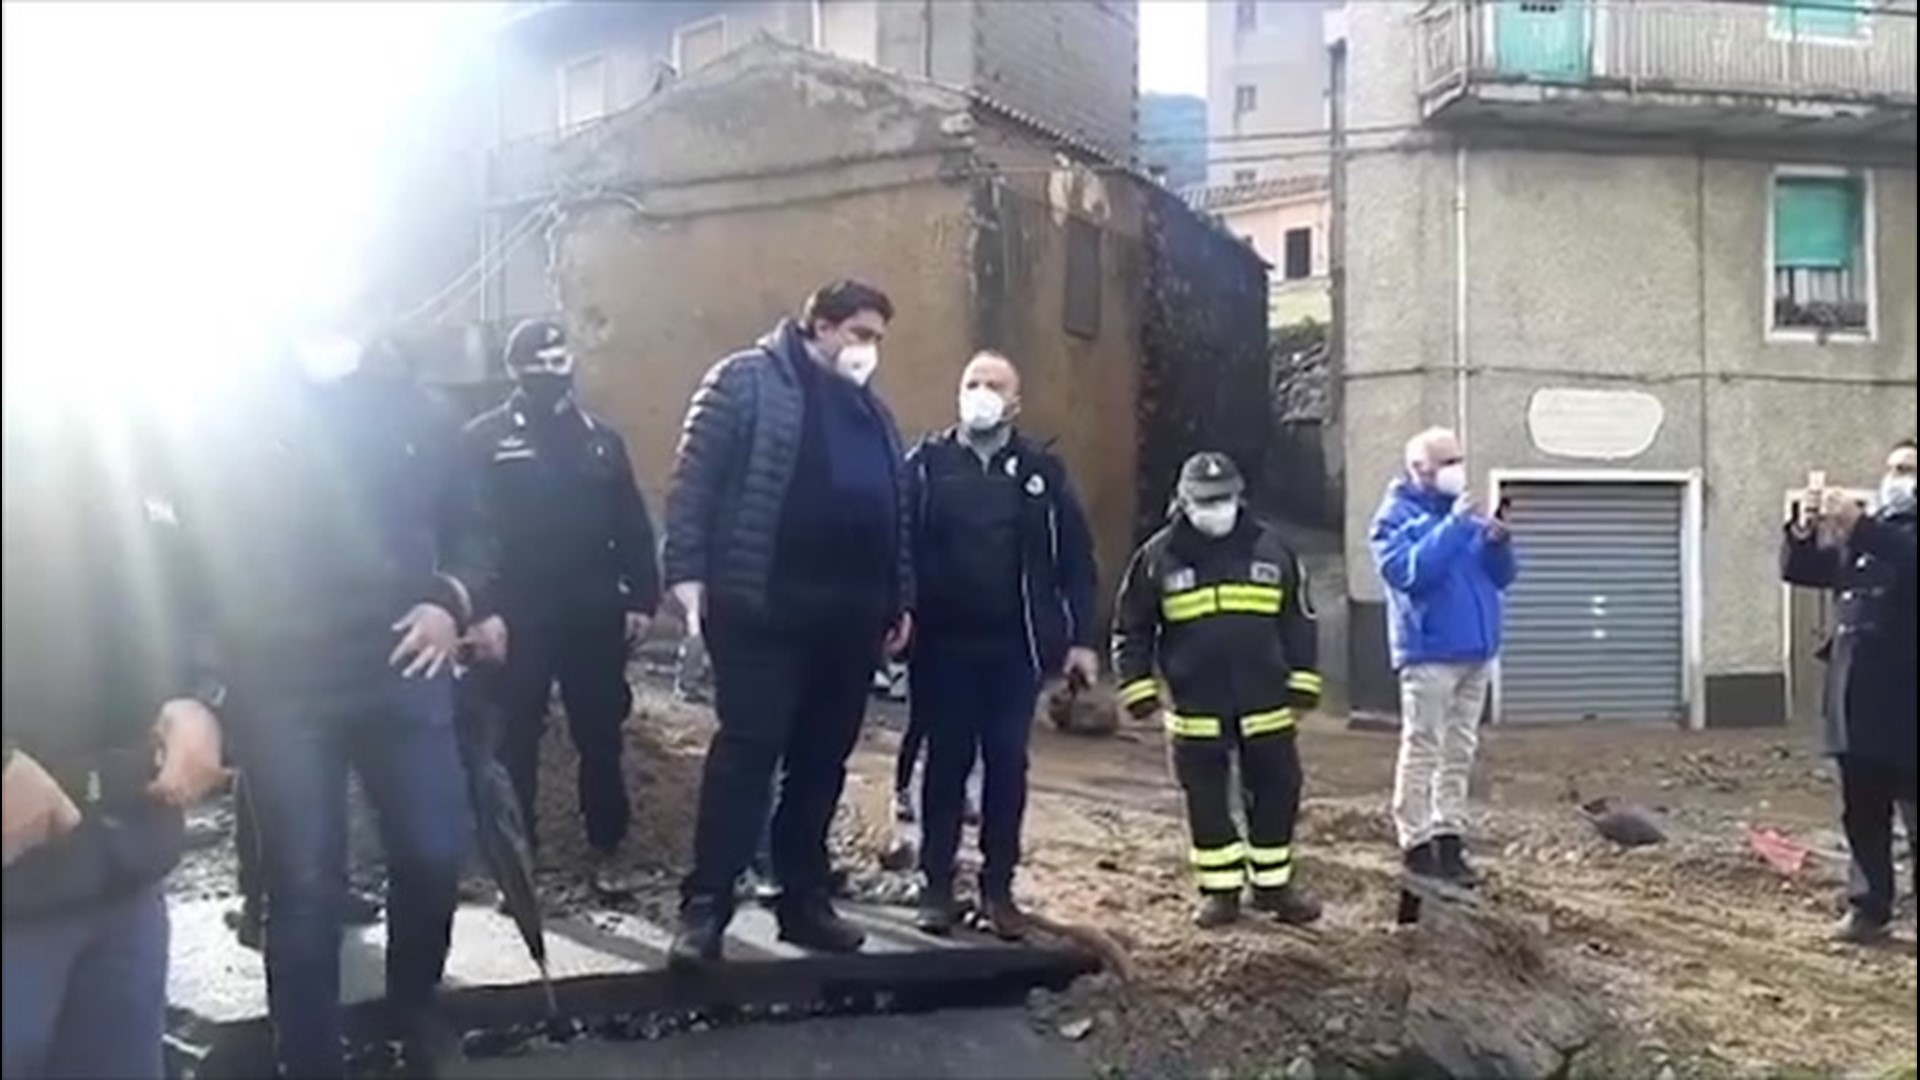 The President of Sardinia surveyed damage in the town of Bitti on Nov. 29, after massive flooding caused landslides and killed at least three people on Nov. 28.